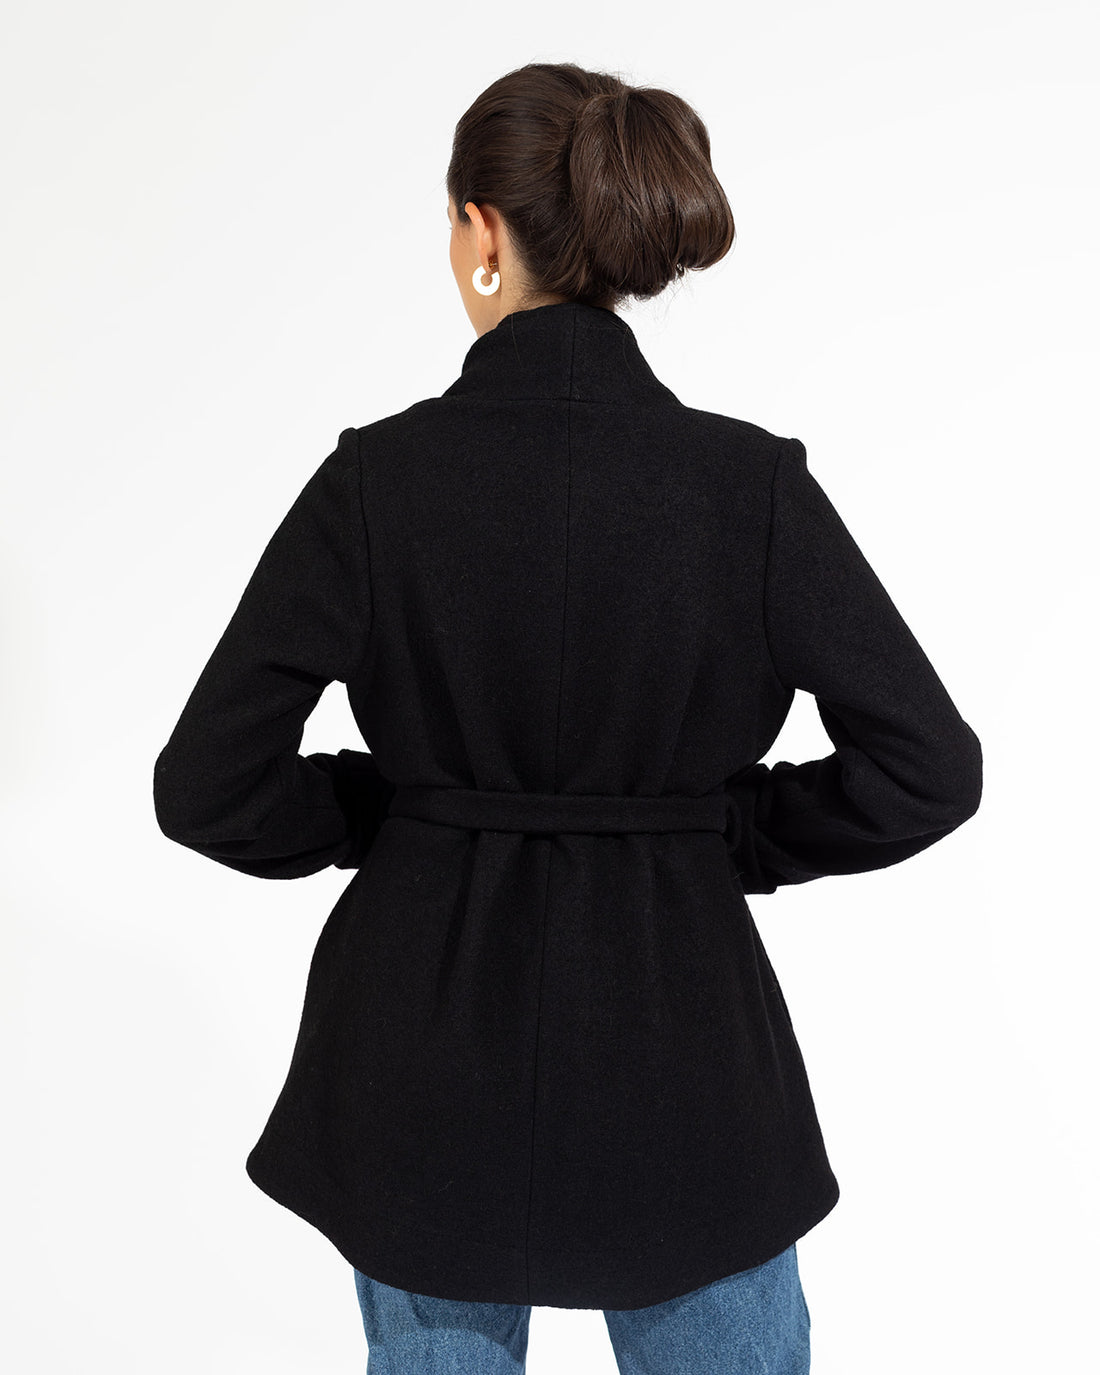 Back view, belted coat